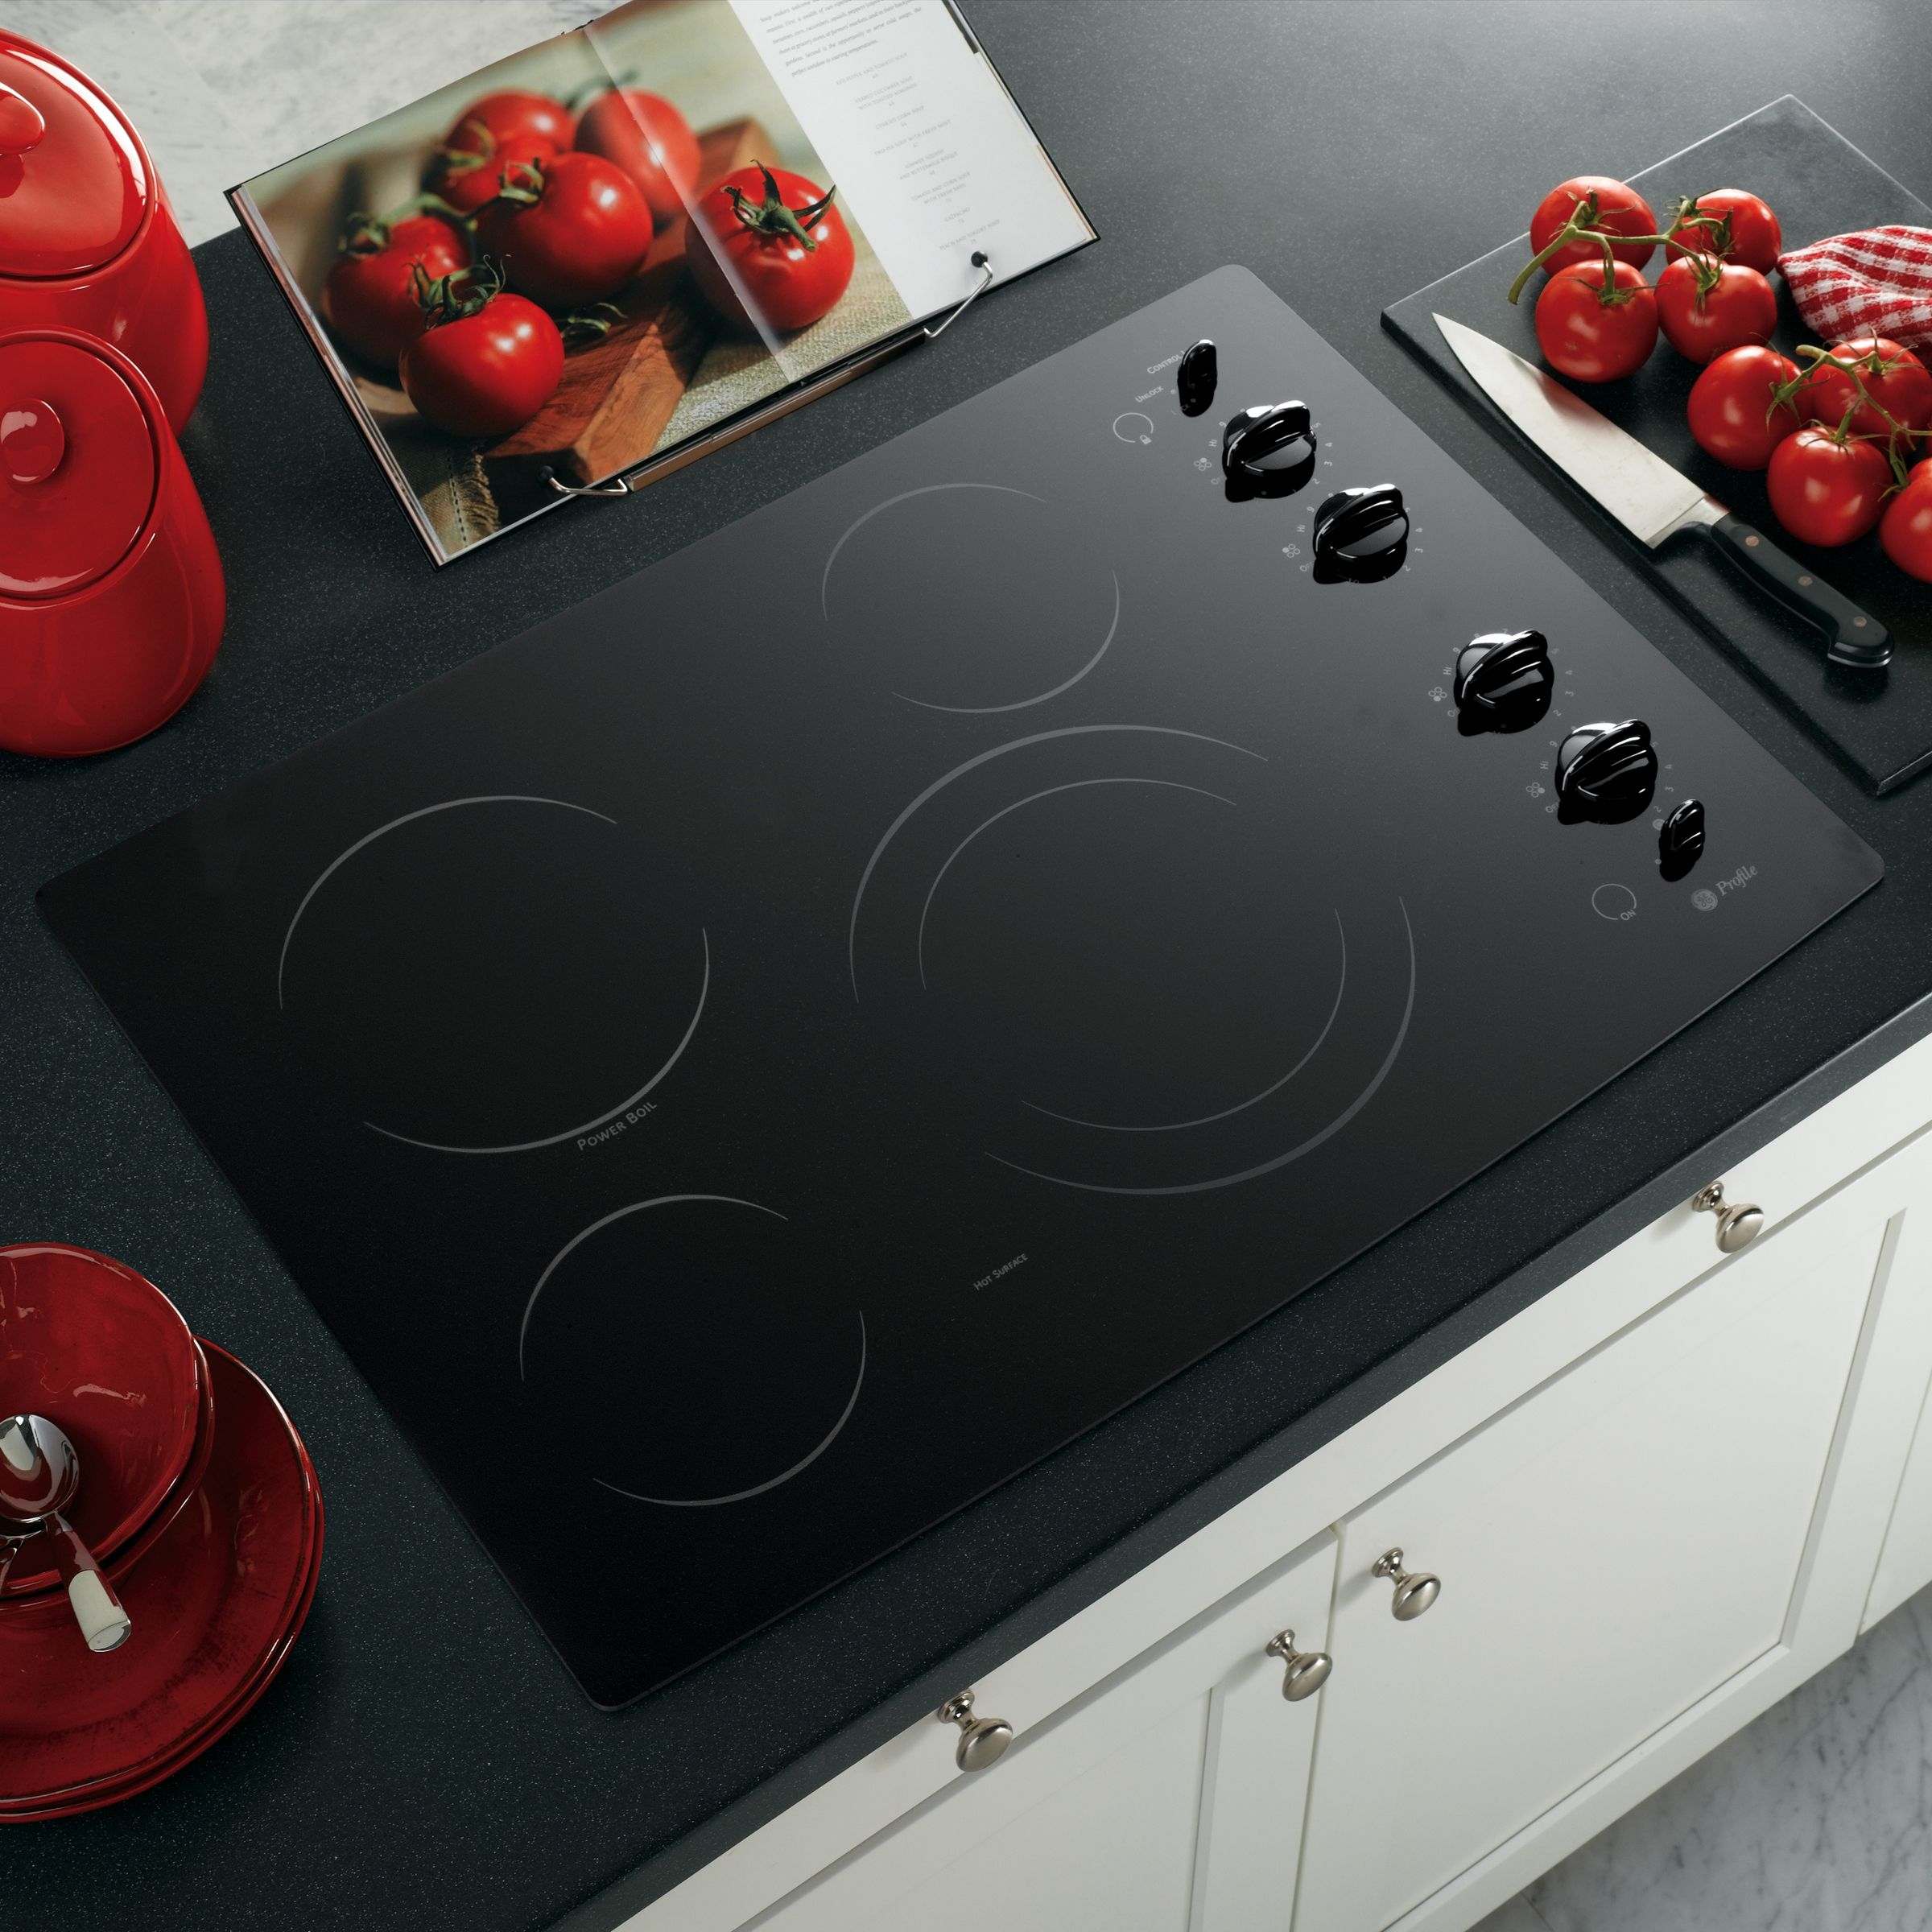 How to replace the glass top on an electric cooktop